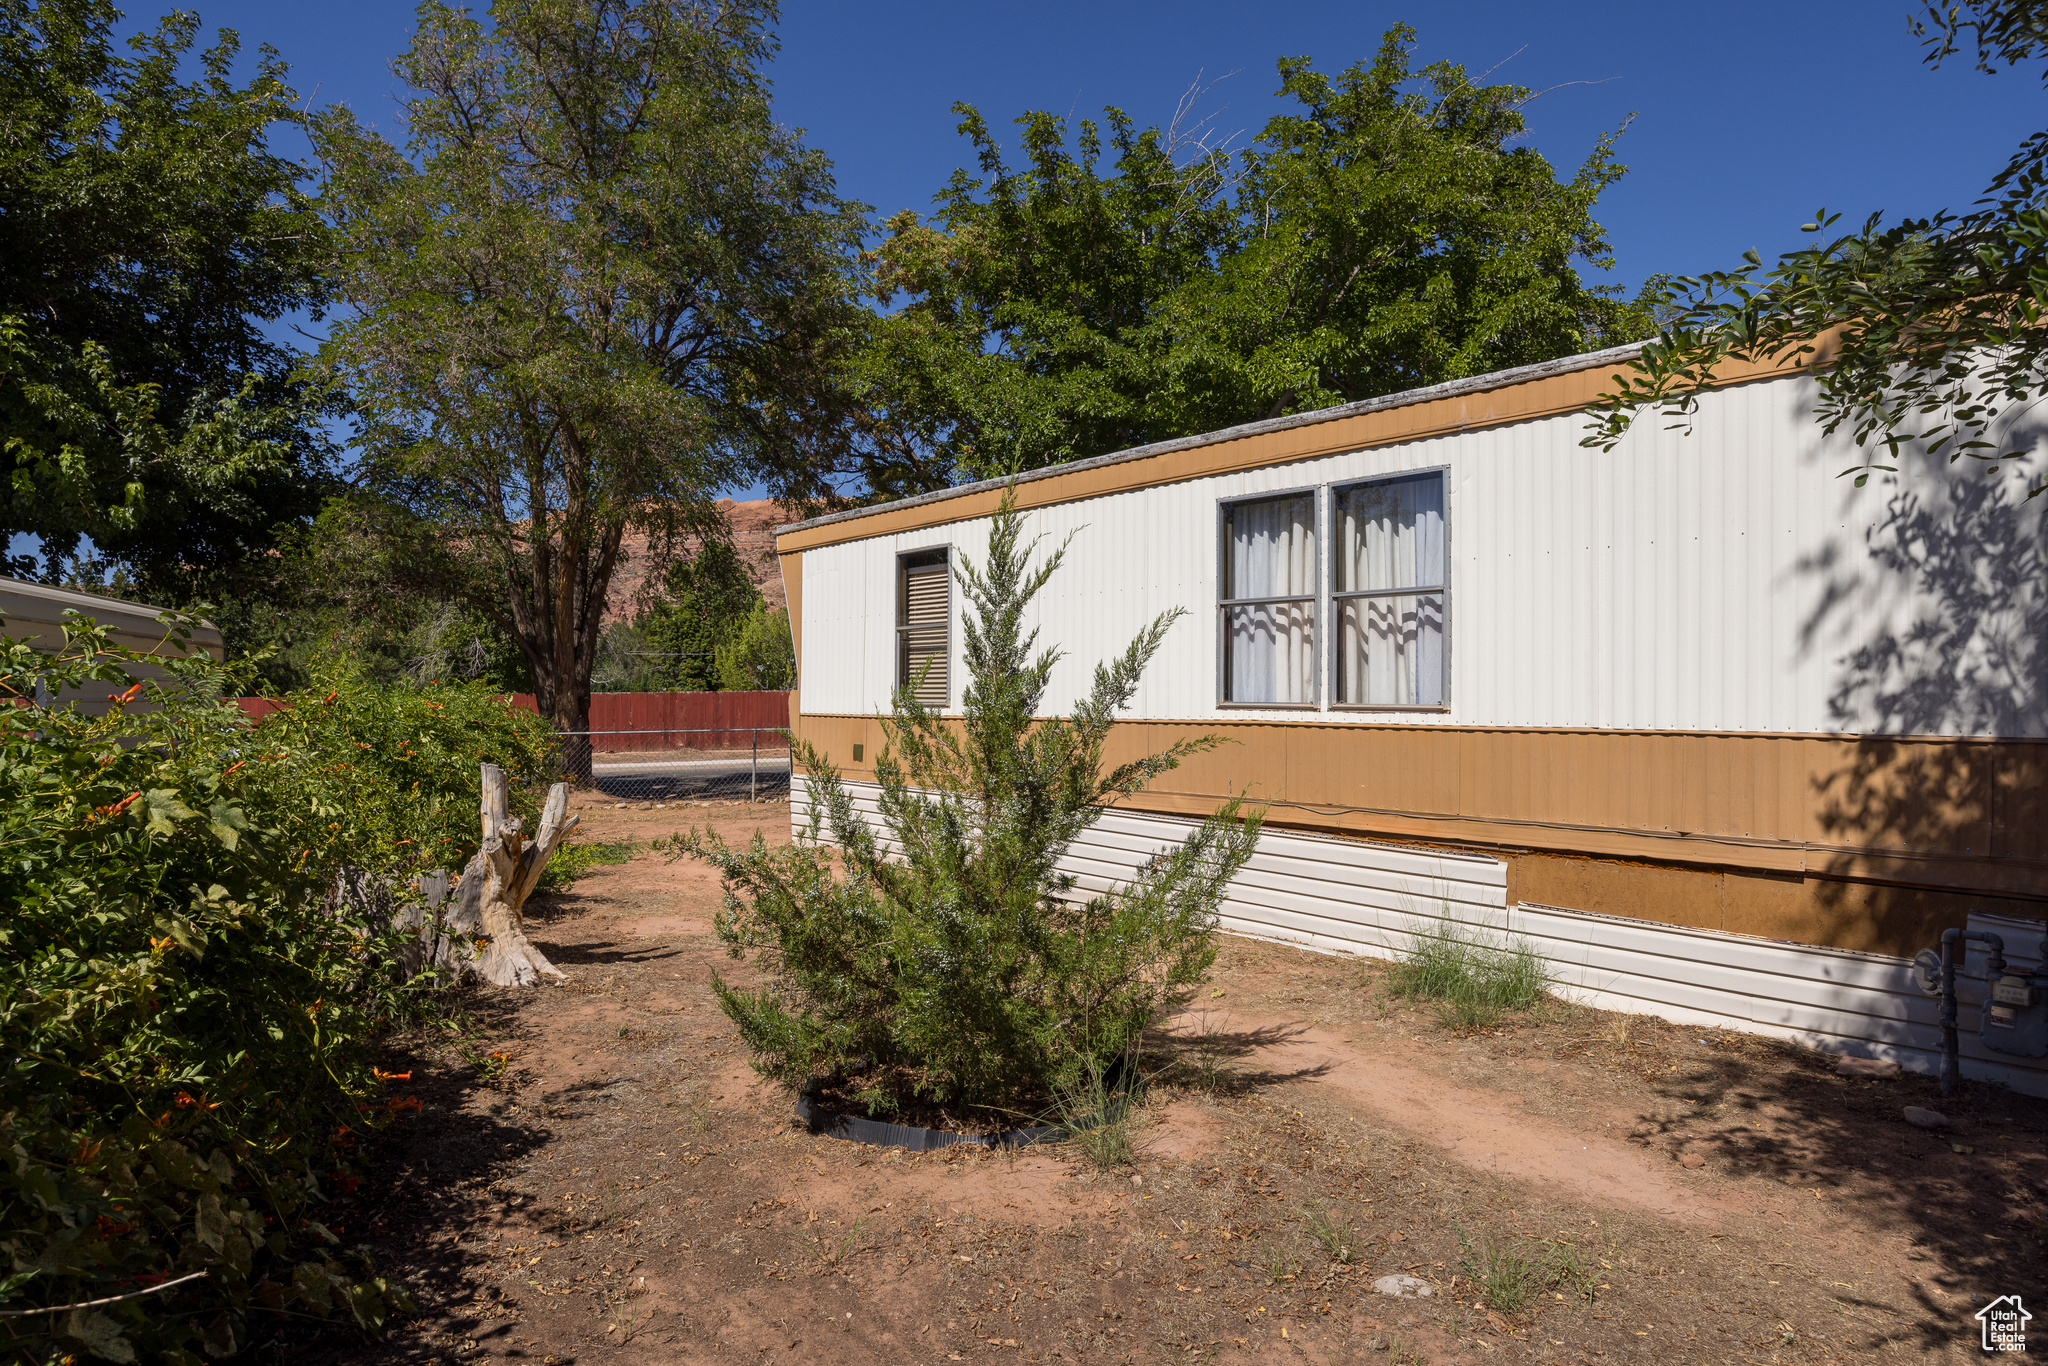 381 MCGILL, Moab, Utah 84532, 2 Bedrooms Bedrooms, 6 Rooms Rooms,1 BathroomBathrooms,Residential,For sale,MCGILL,1984596